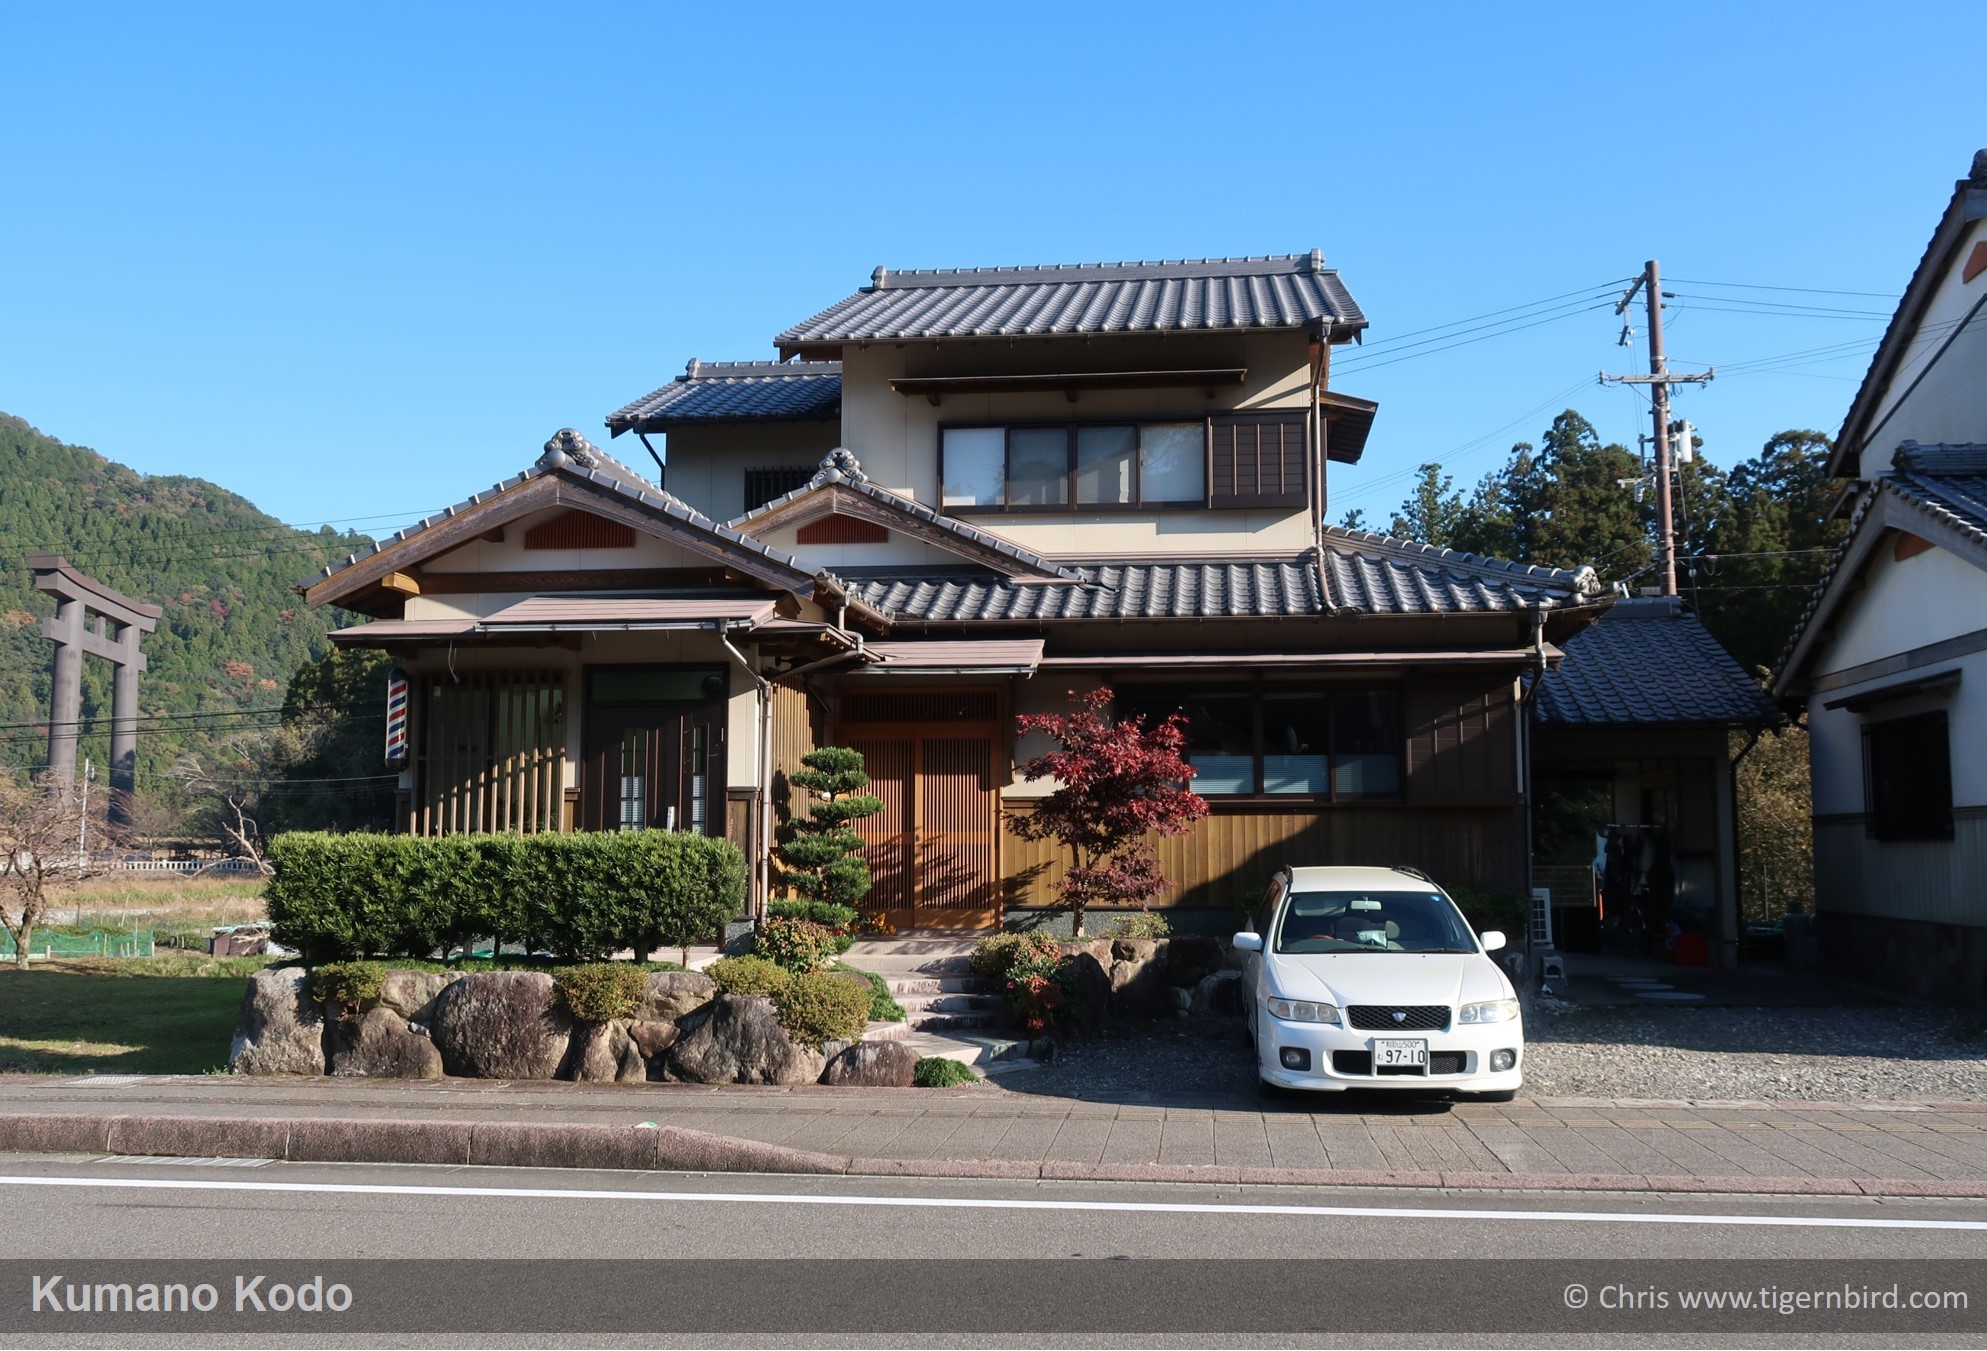 Modern Japanese-style house in town in Kumano, Japan